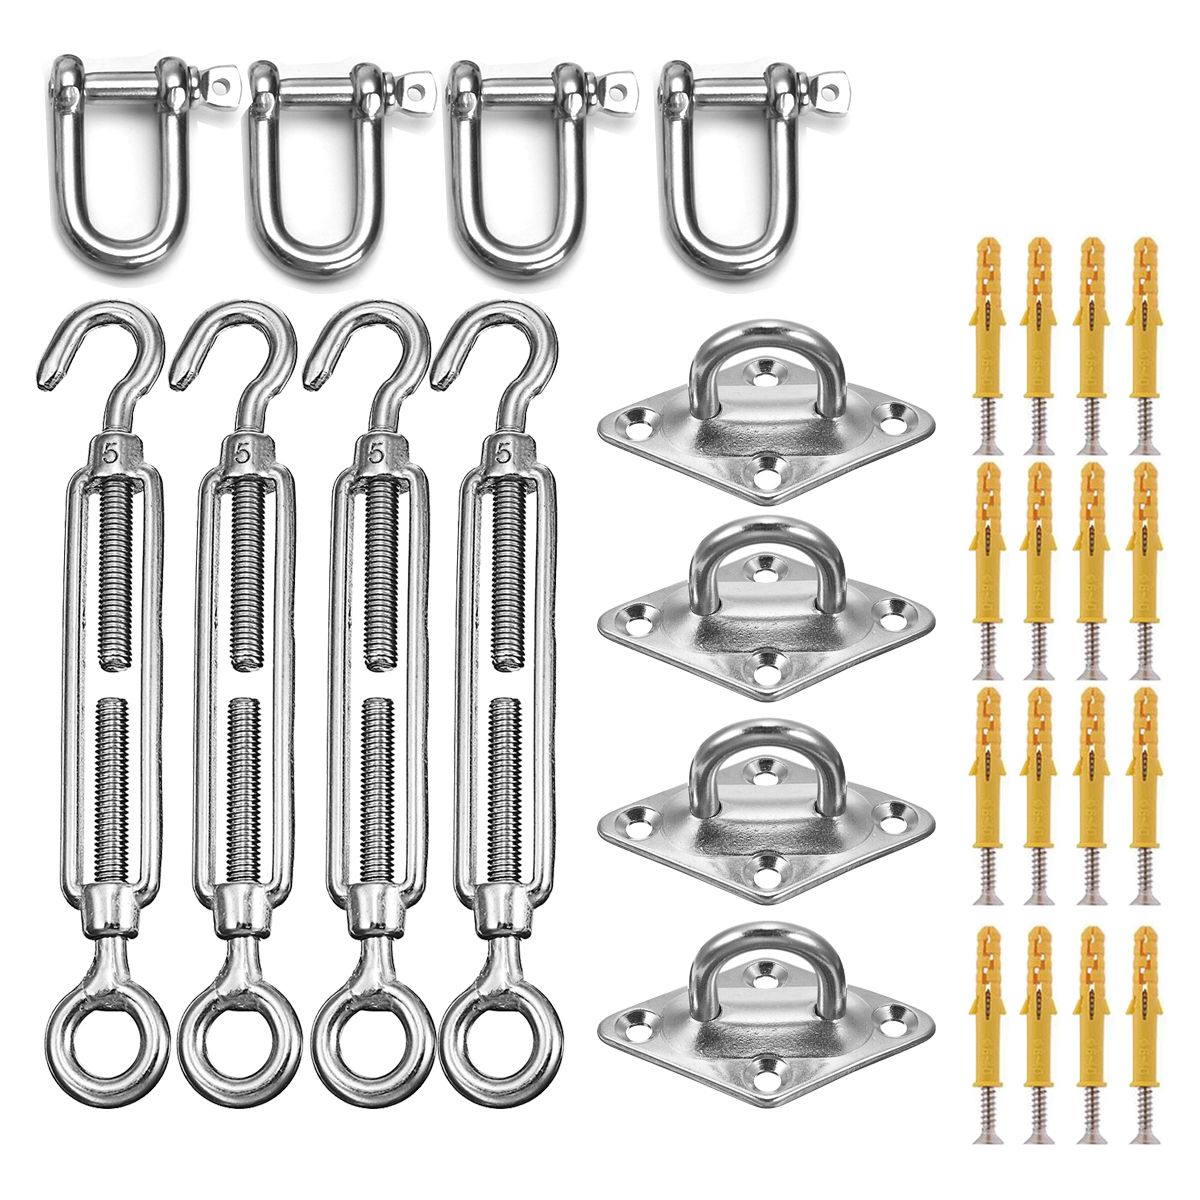 28Pcs-Sun-Shade-Sail-Accessories-for-Triangle-or-Square-Shade-Sail-Replacement-Fitting-Tools-Kit-1392249